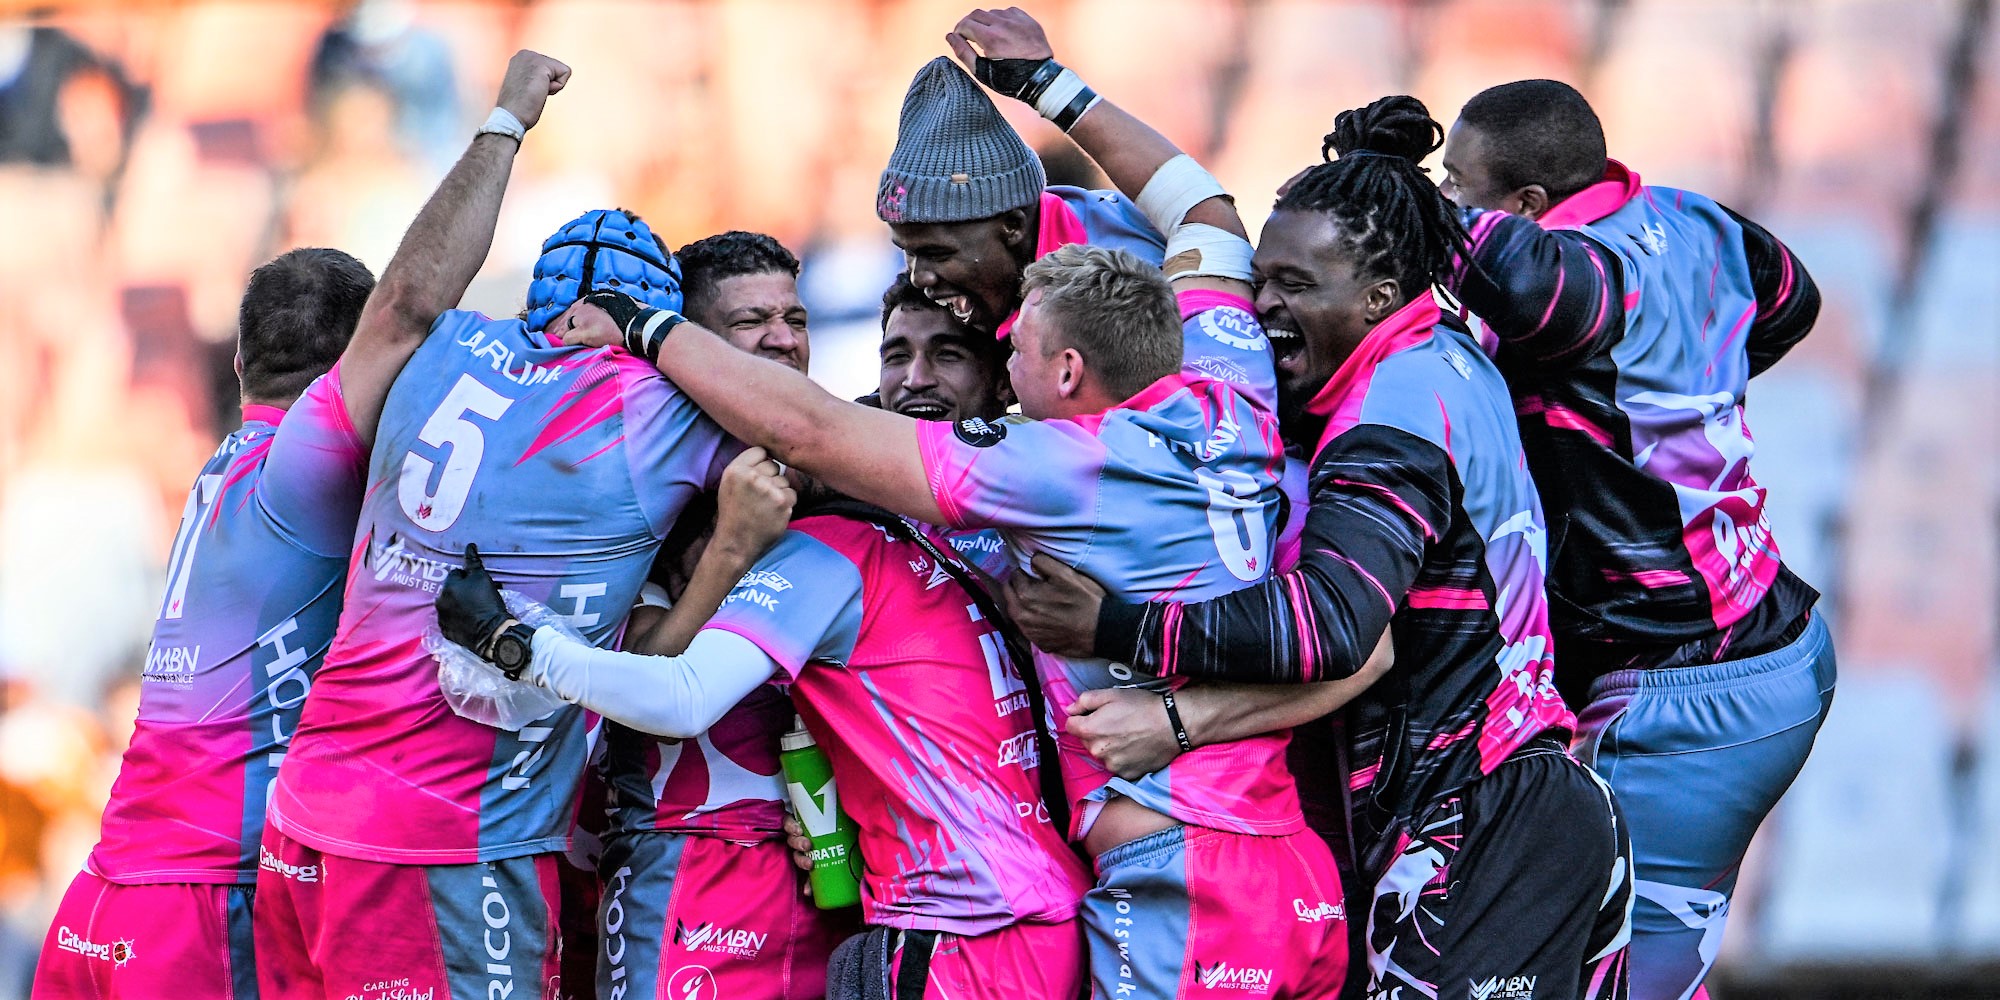 BLOEMFONTEIN, SOUTH AFRICA - JUNE 18: Pumas celebrating during the Carling Currie Cup semi-final match between Toyota Cheetahs and Airlink Pumas at Toyota Stadium on June 18, 2022 in Bloemfontein, South Africa. (Photo by Johan Pretorius/Gallo Images)